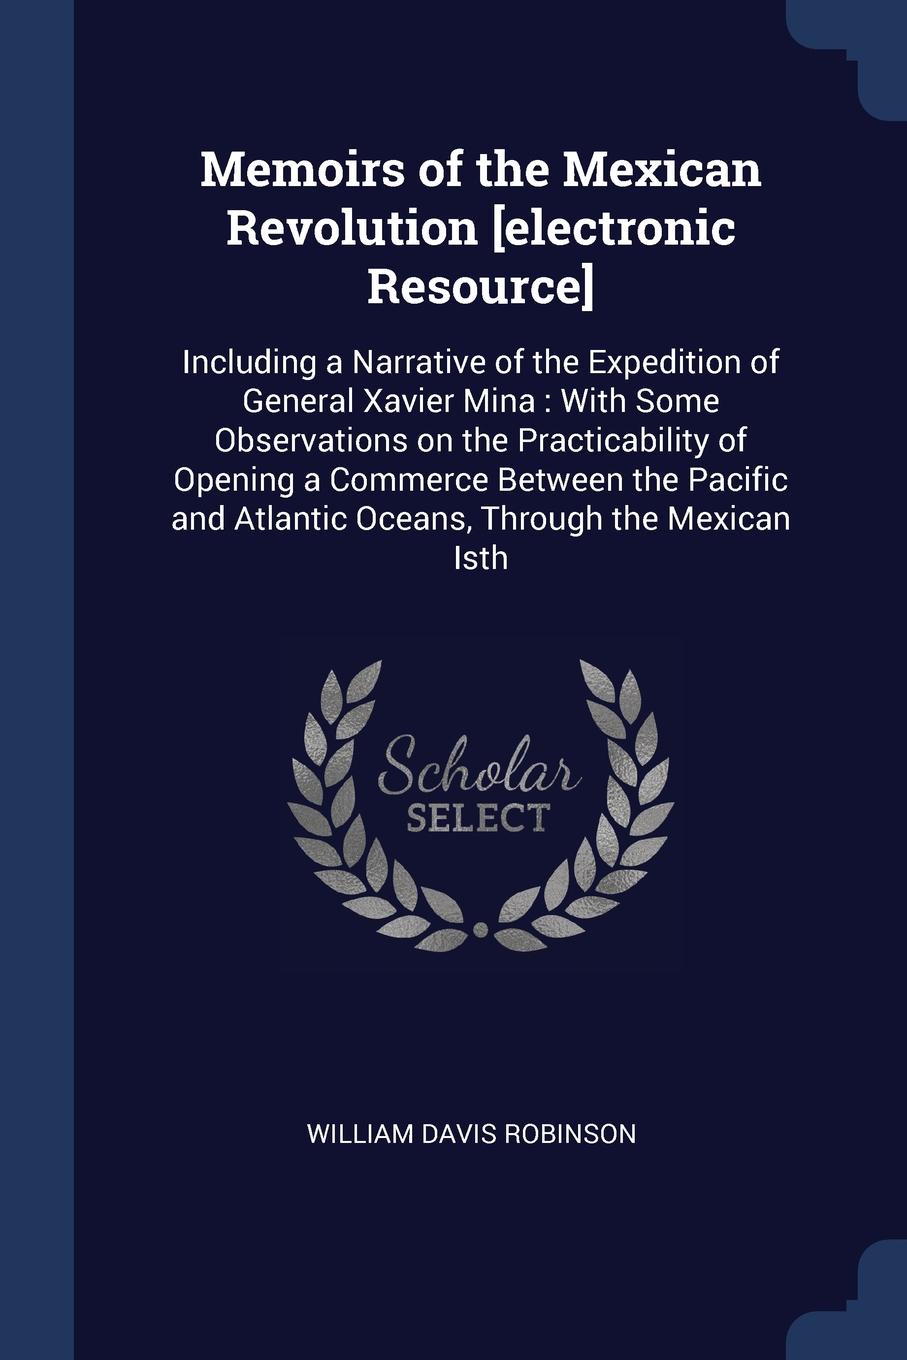 Memoirs of the Mexican Revolution .electronic Resource.. Including a Narrative of the Expedition of General Xavier Mina : With Some Observations on the Practicability of Opening a Commerce Between the Pacific and Atlantic Oceans, Through the Mexic...